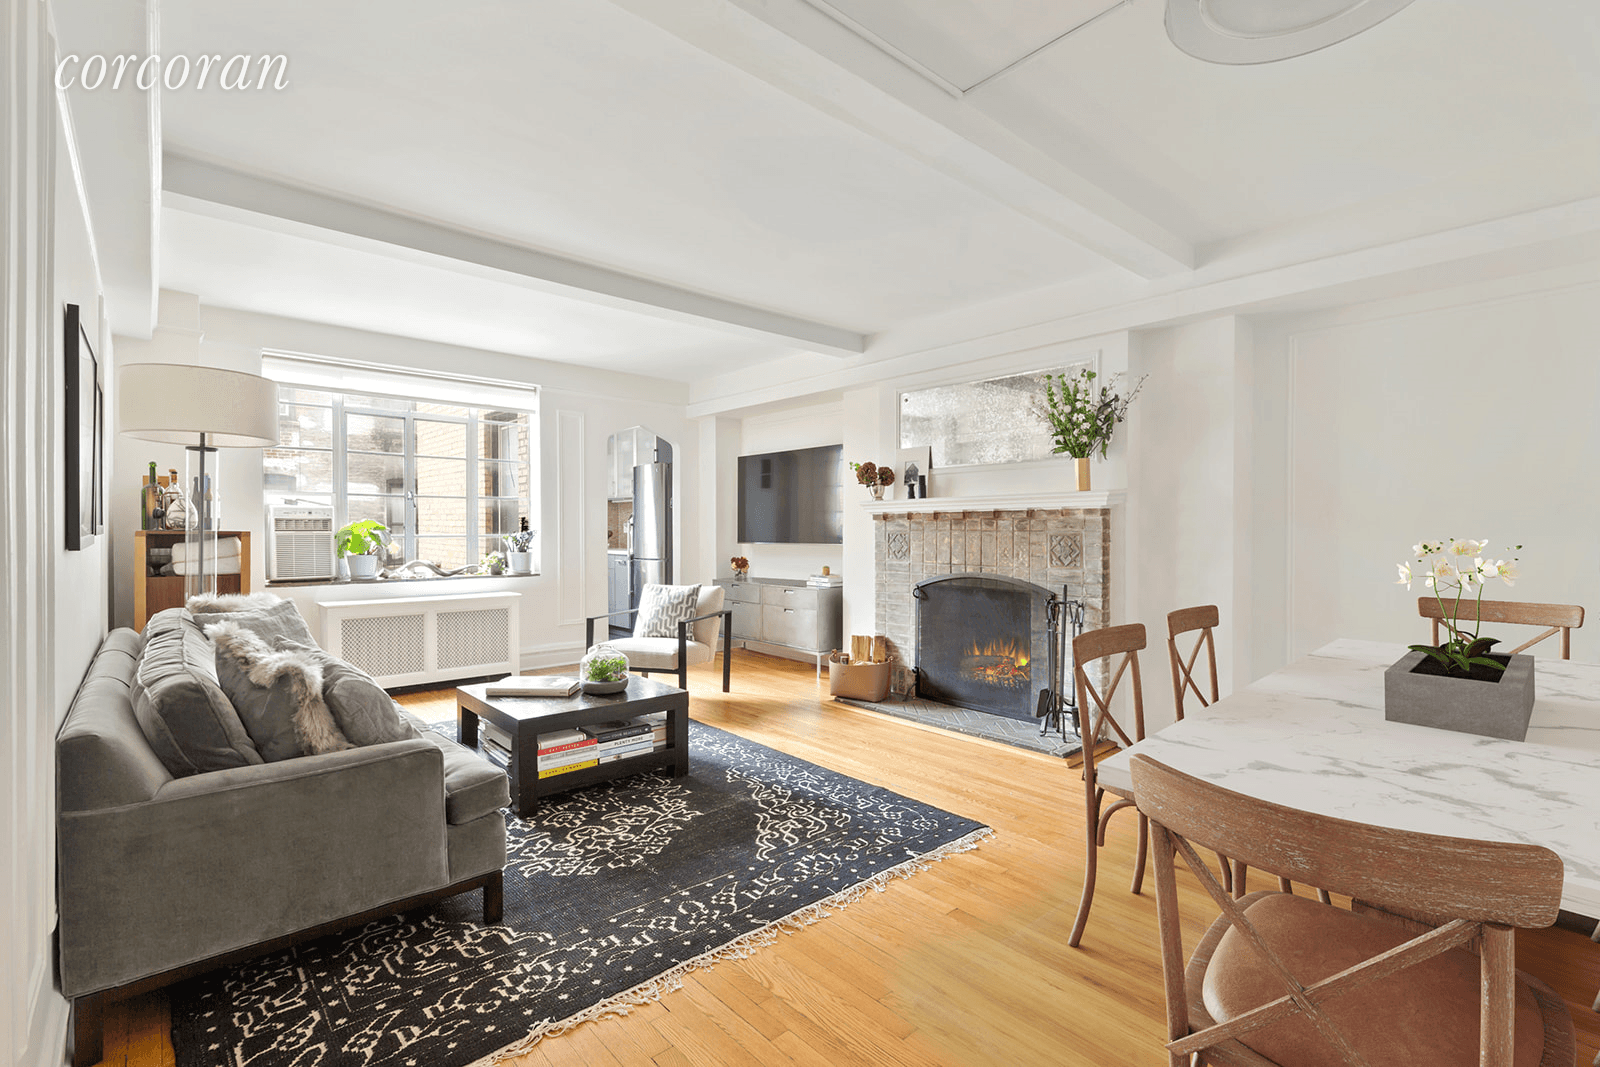 Located on one of the most desirable blocks in the city, this chic, bright and airy, pin drop quiet, one bedroom, one bathroom apartment has been beautifully renovated and incredibly ...